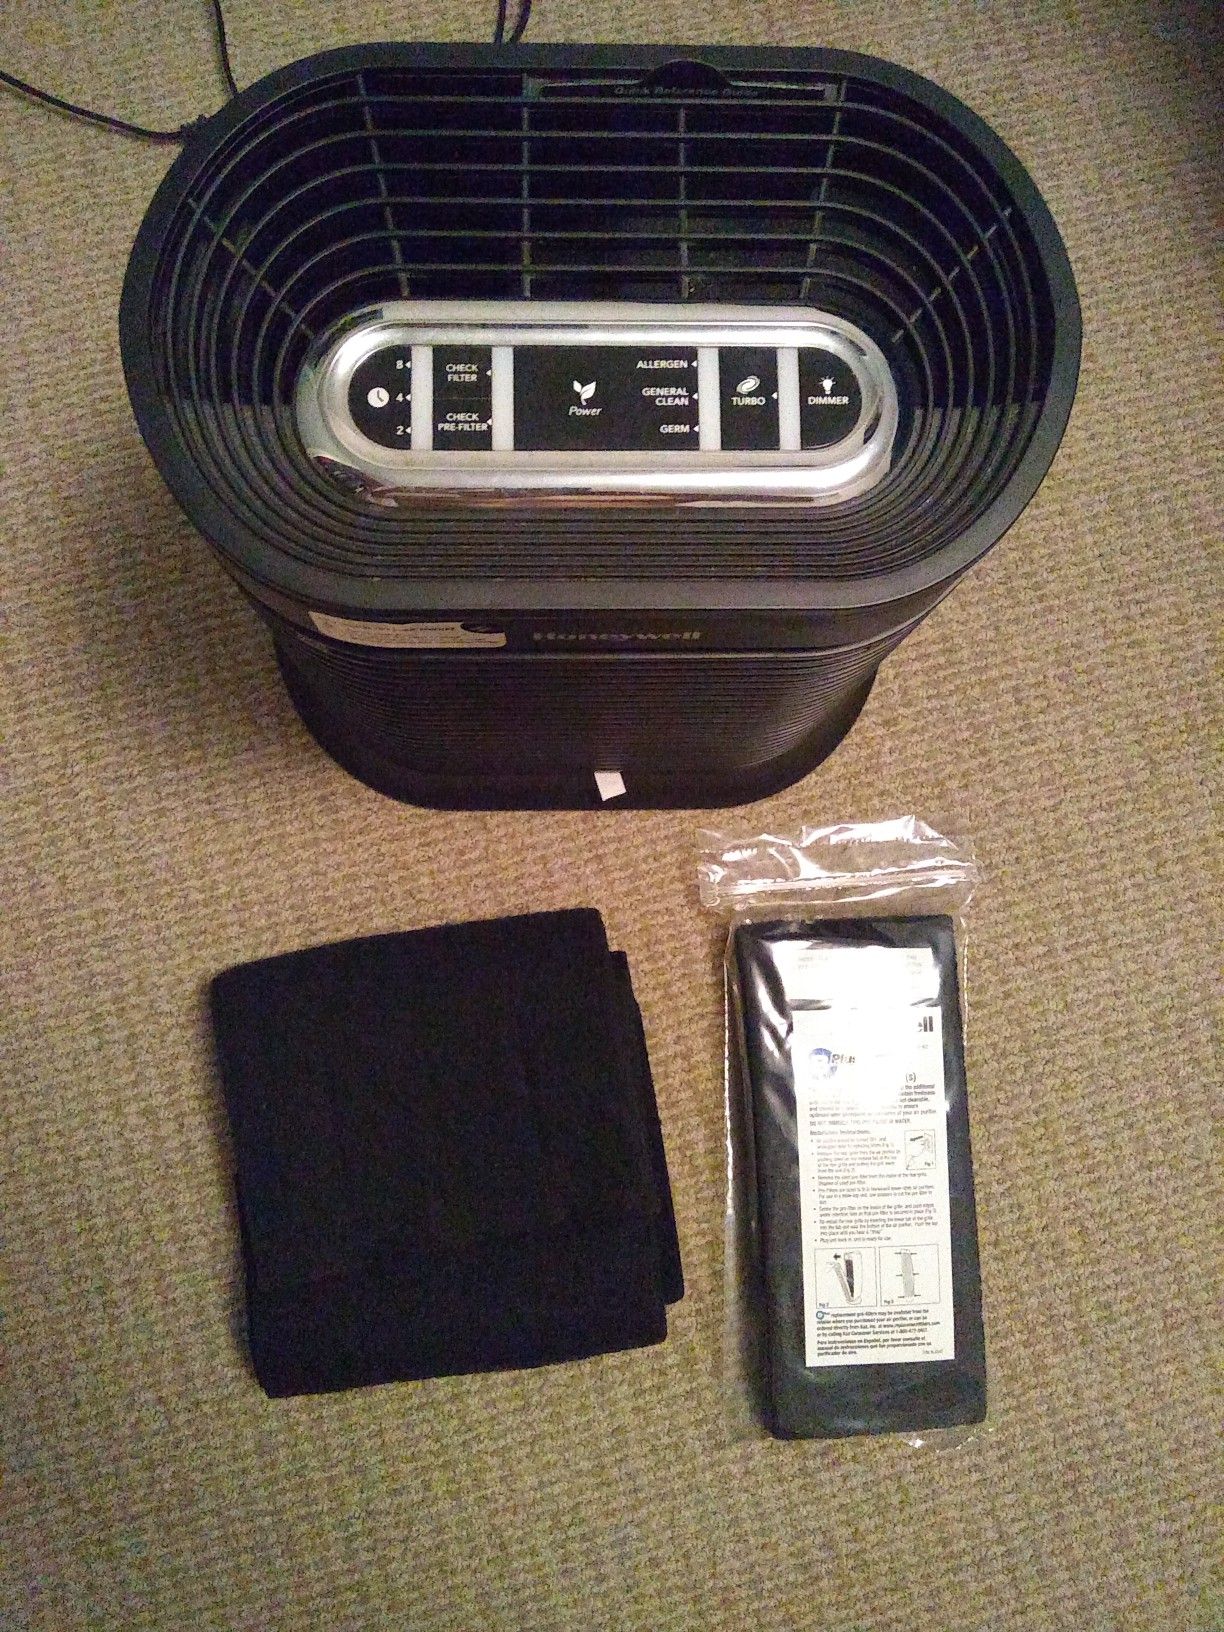 Honeywell air purifier with spare filters